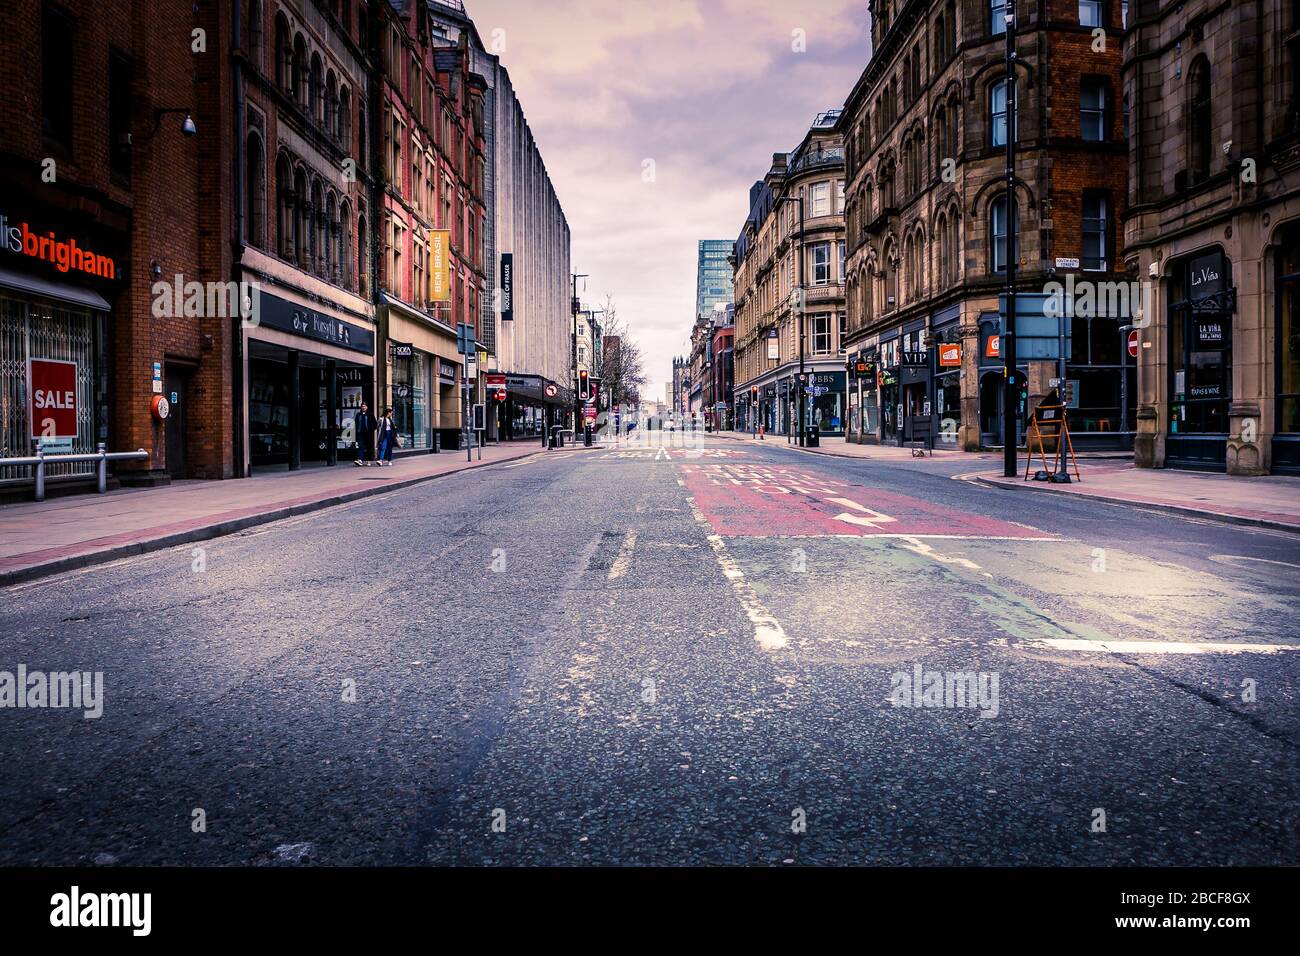 Deansgate, Manchester, United Kingdom. Empty streets, closed business's during the coronavirus outbreak, April 2020. Stock Photo